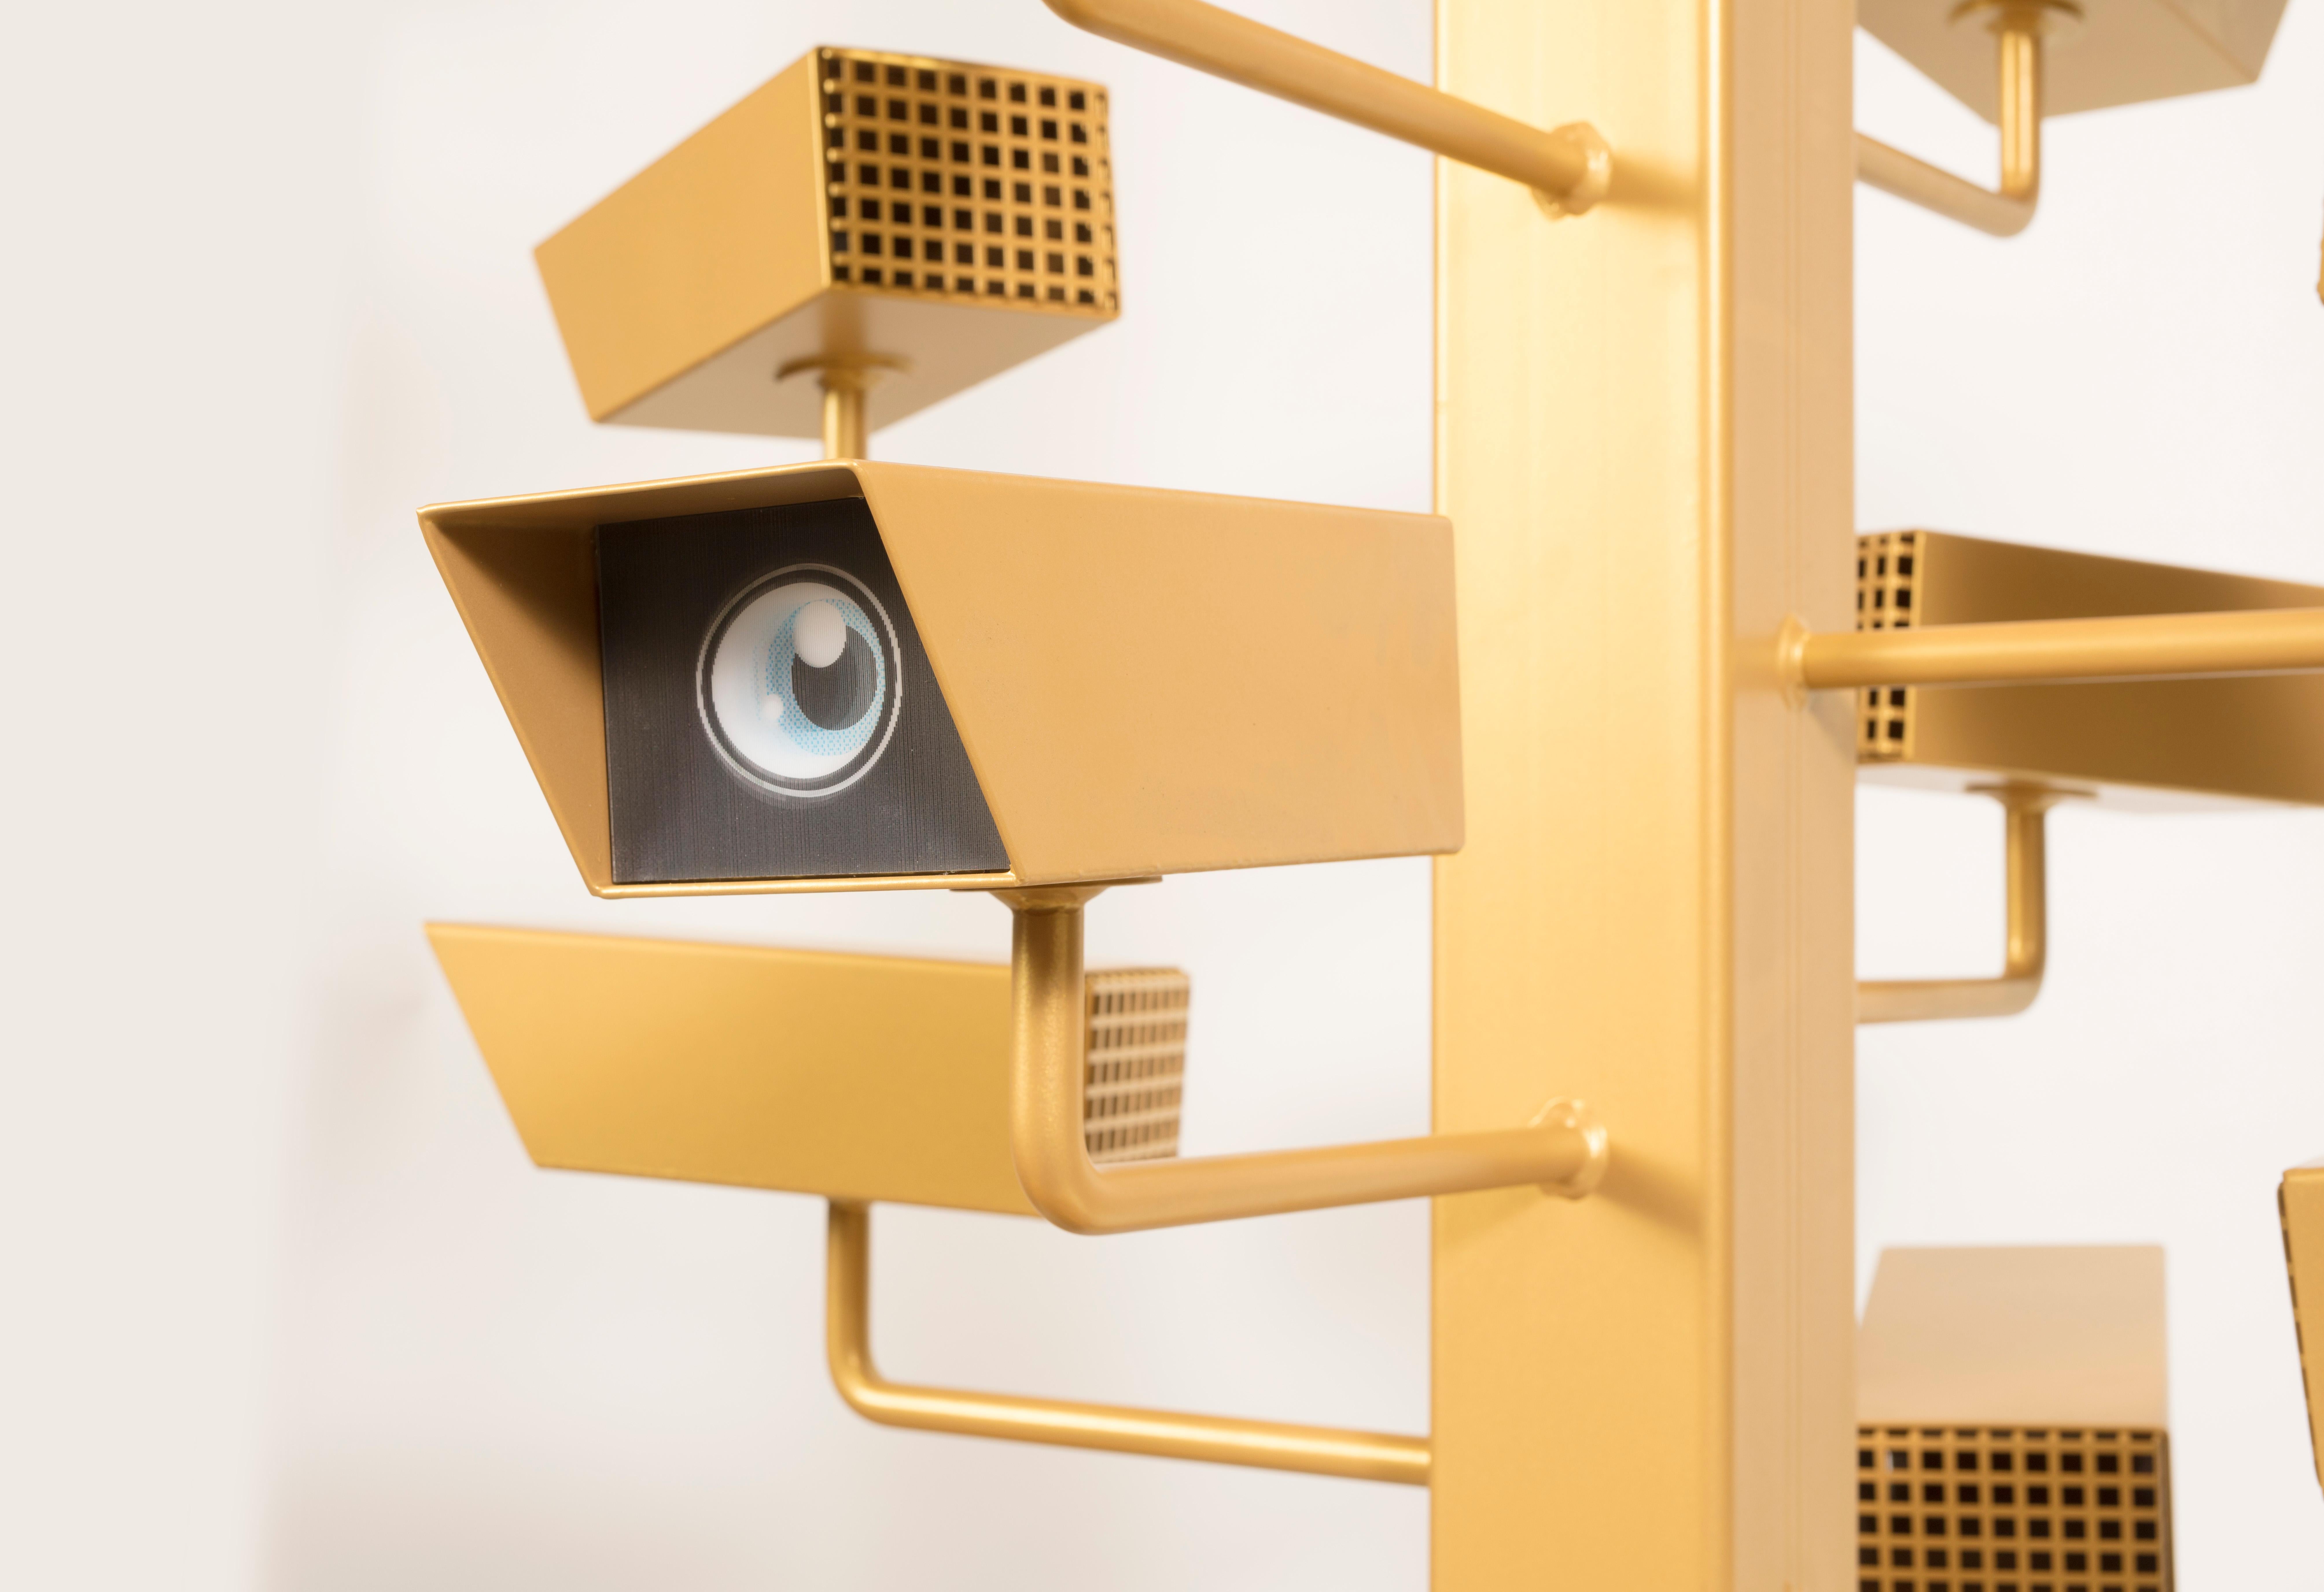 Nothing goes unseen anymore. Anonymity is history. And secrets do not exist. How safe do you feel?

This sculpture raises questions about privacy, personal space, and the boundaries of surveillance in our contemporary society. 
It reminds us of the